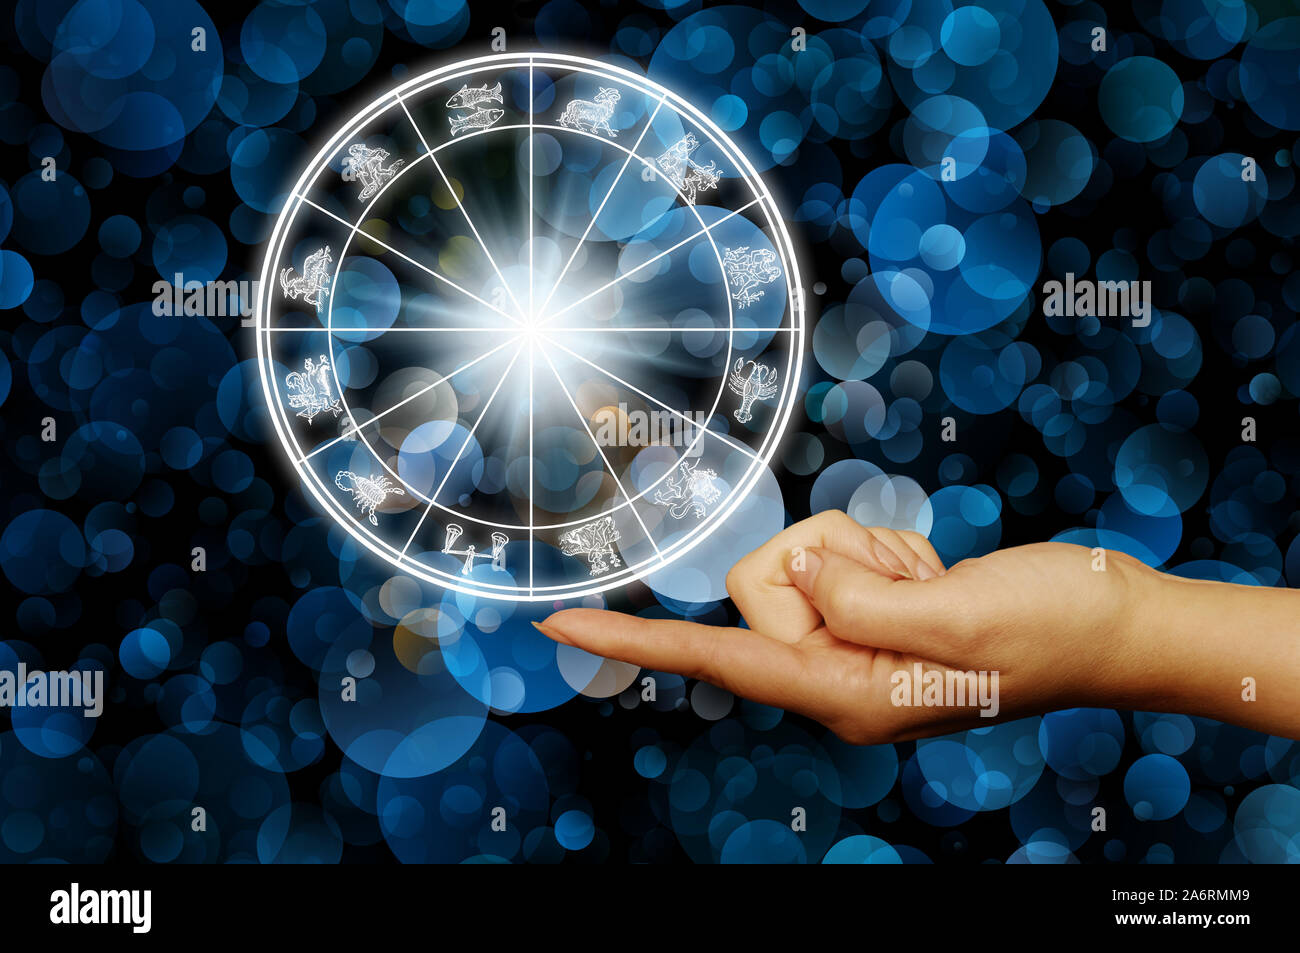 finger holding an astrology wheel with zodiac signs Stock Photo